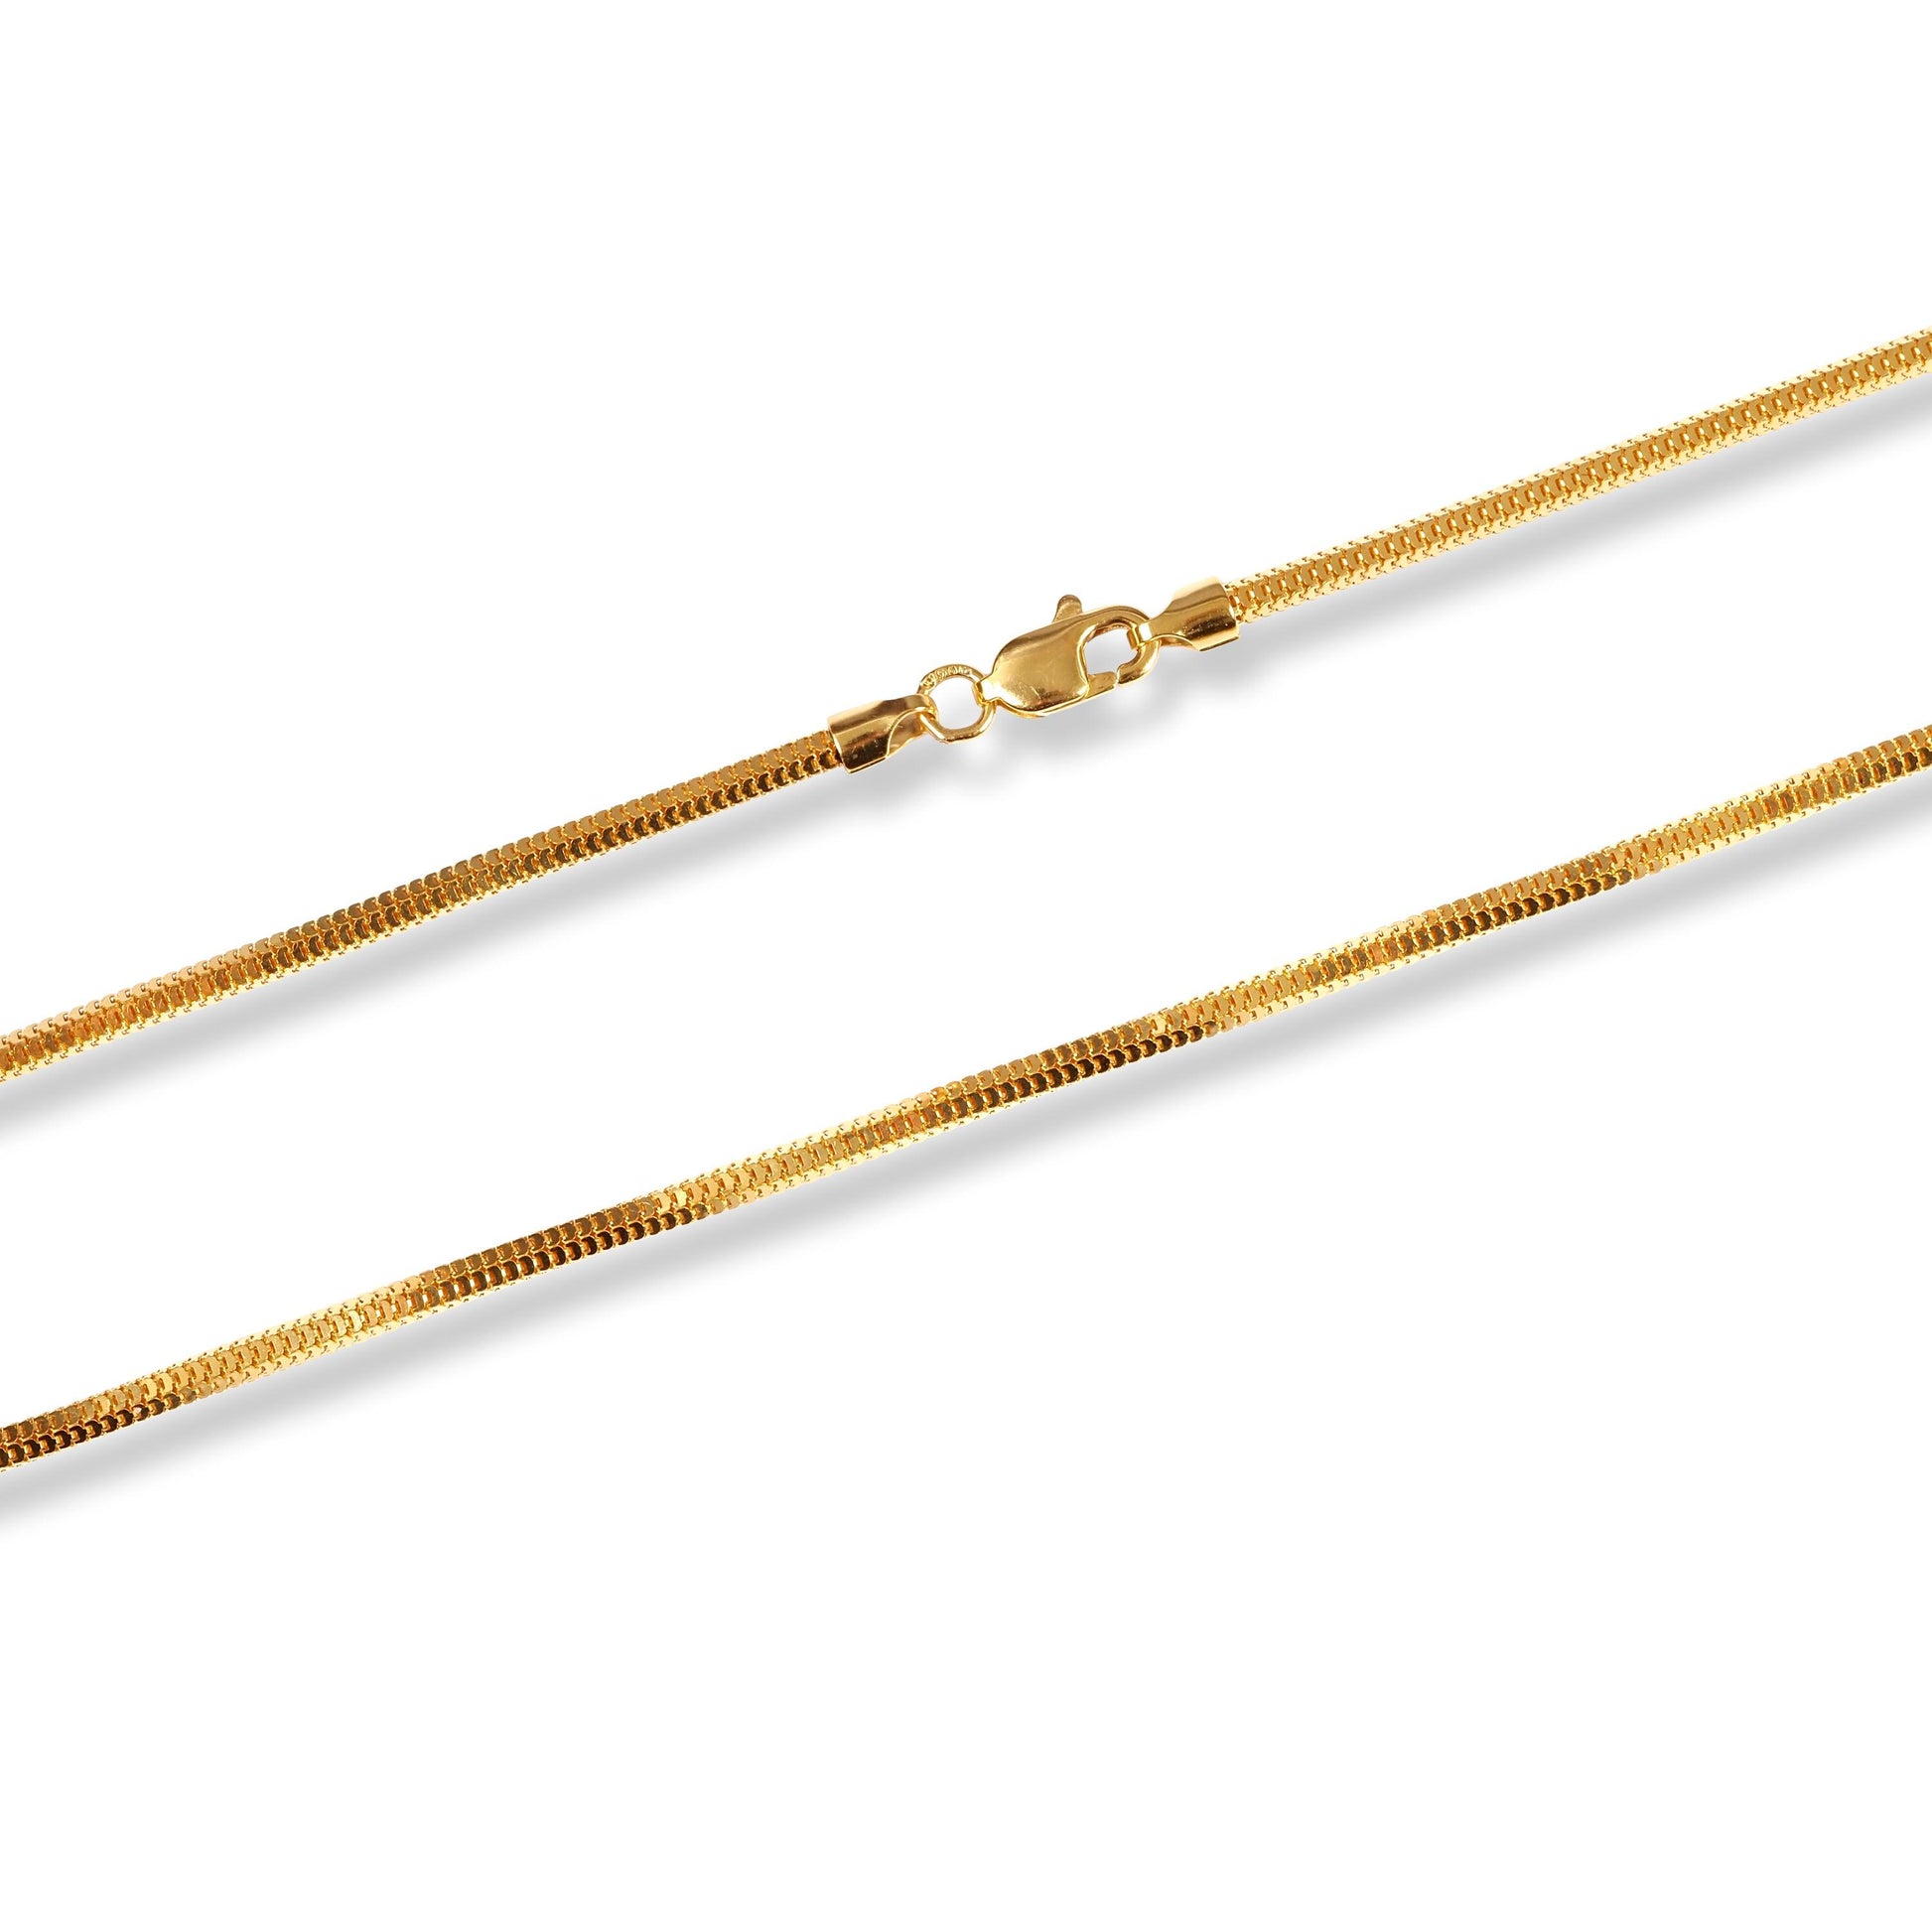 22ct Yellow Gold Round Snake Chain with Lobster Clasp C-1217 - Minar Jewellers